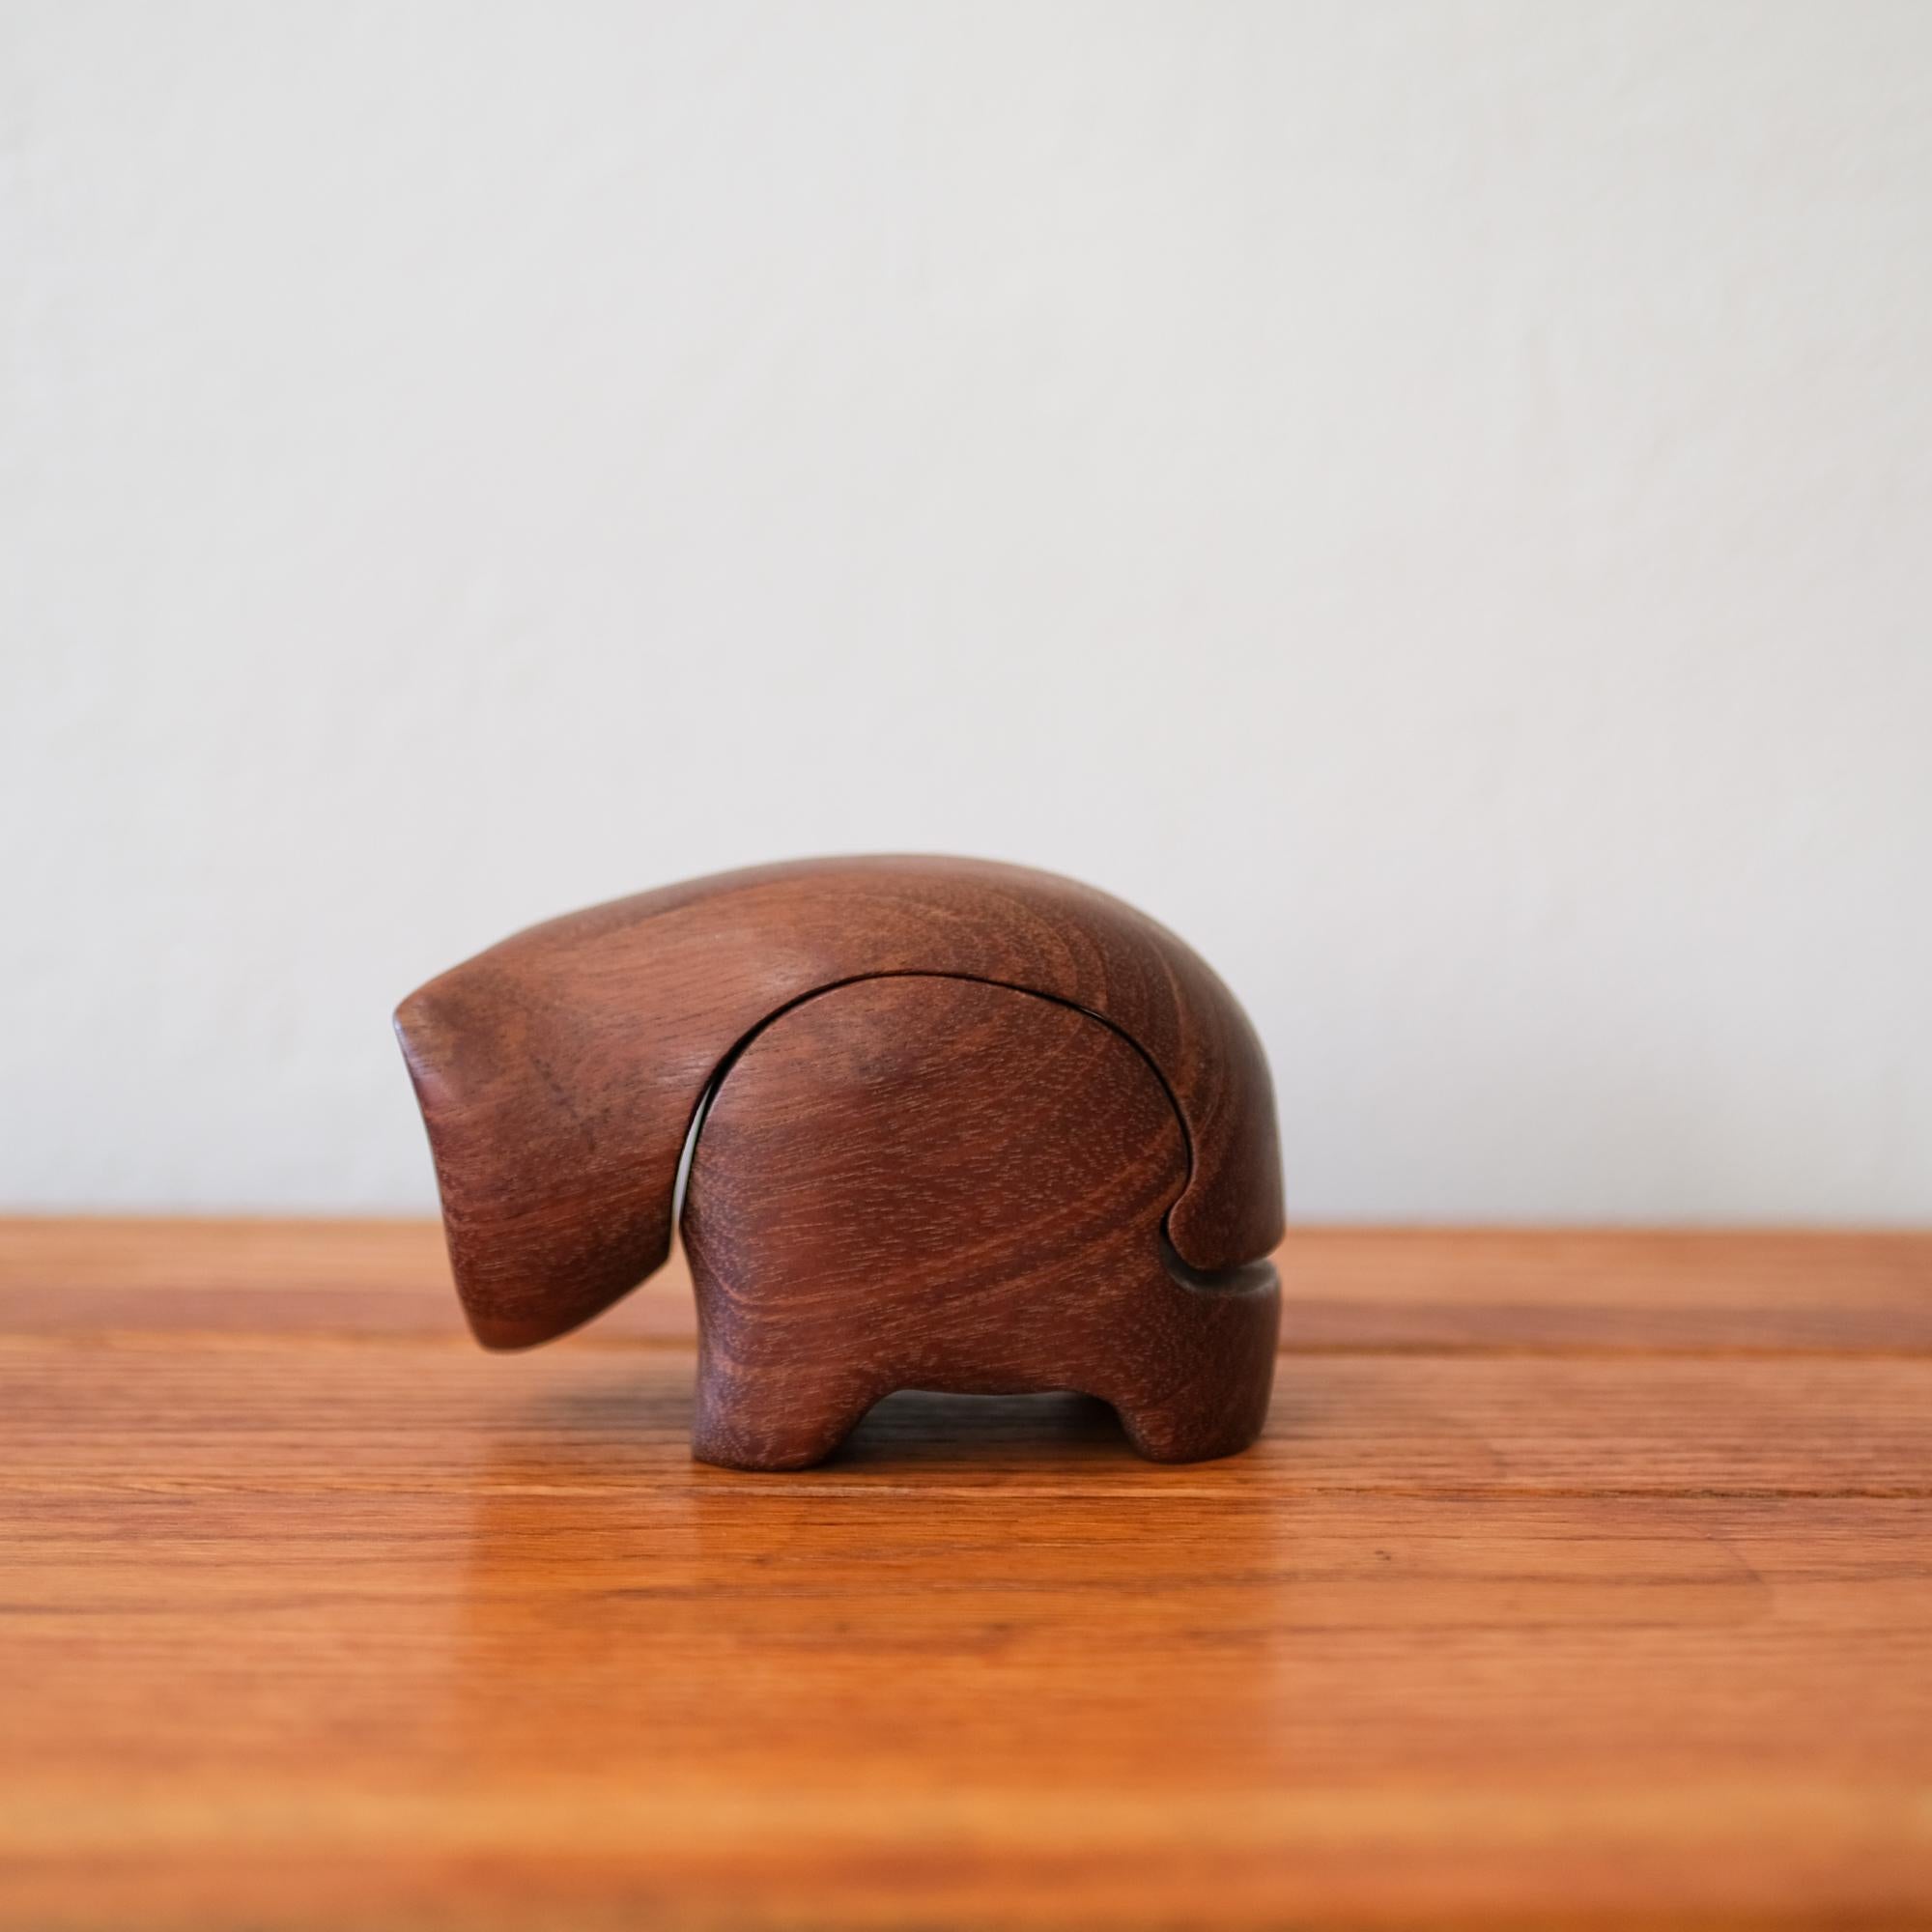 Deborah Bump ring / jewelry box. Carved solid walnut. Signed and dated, 1979.